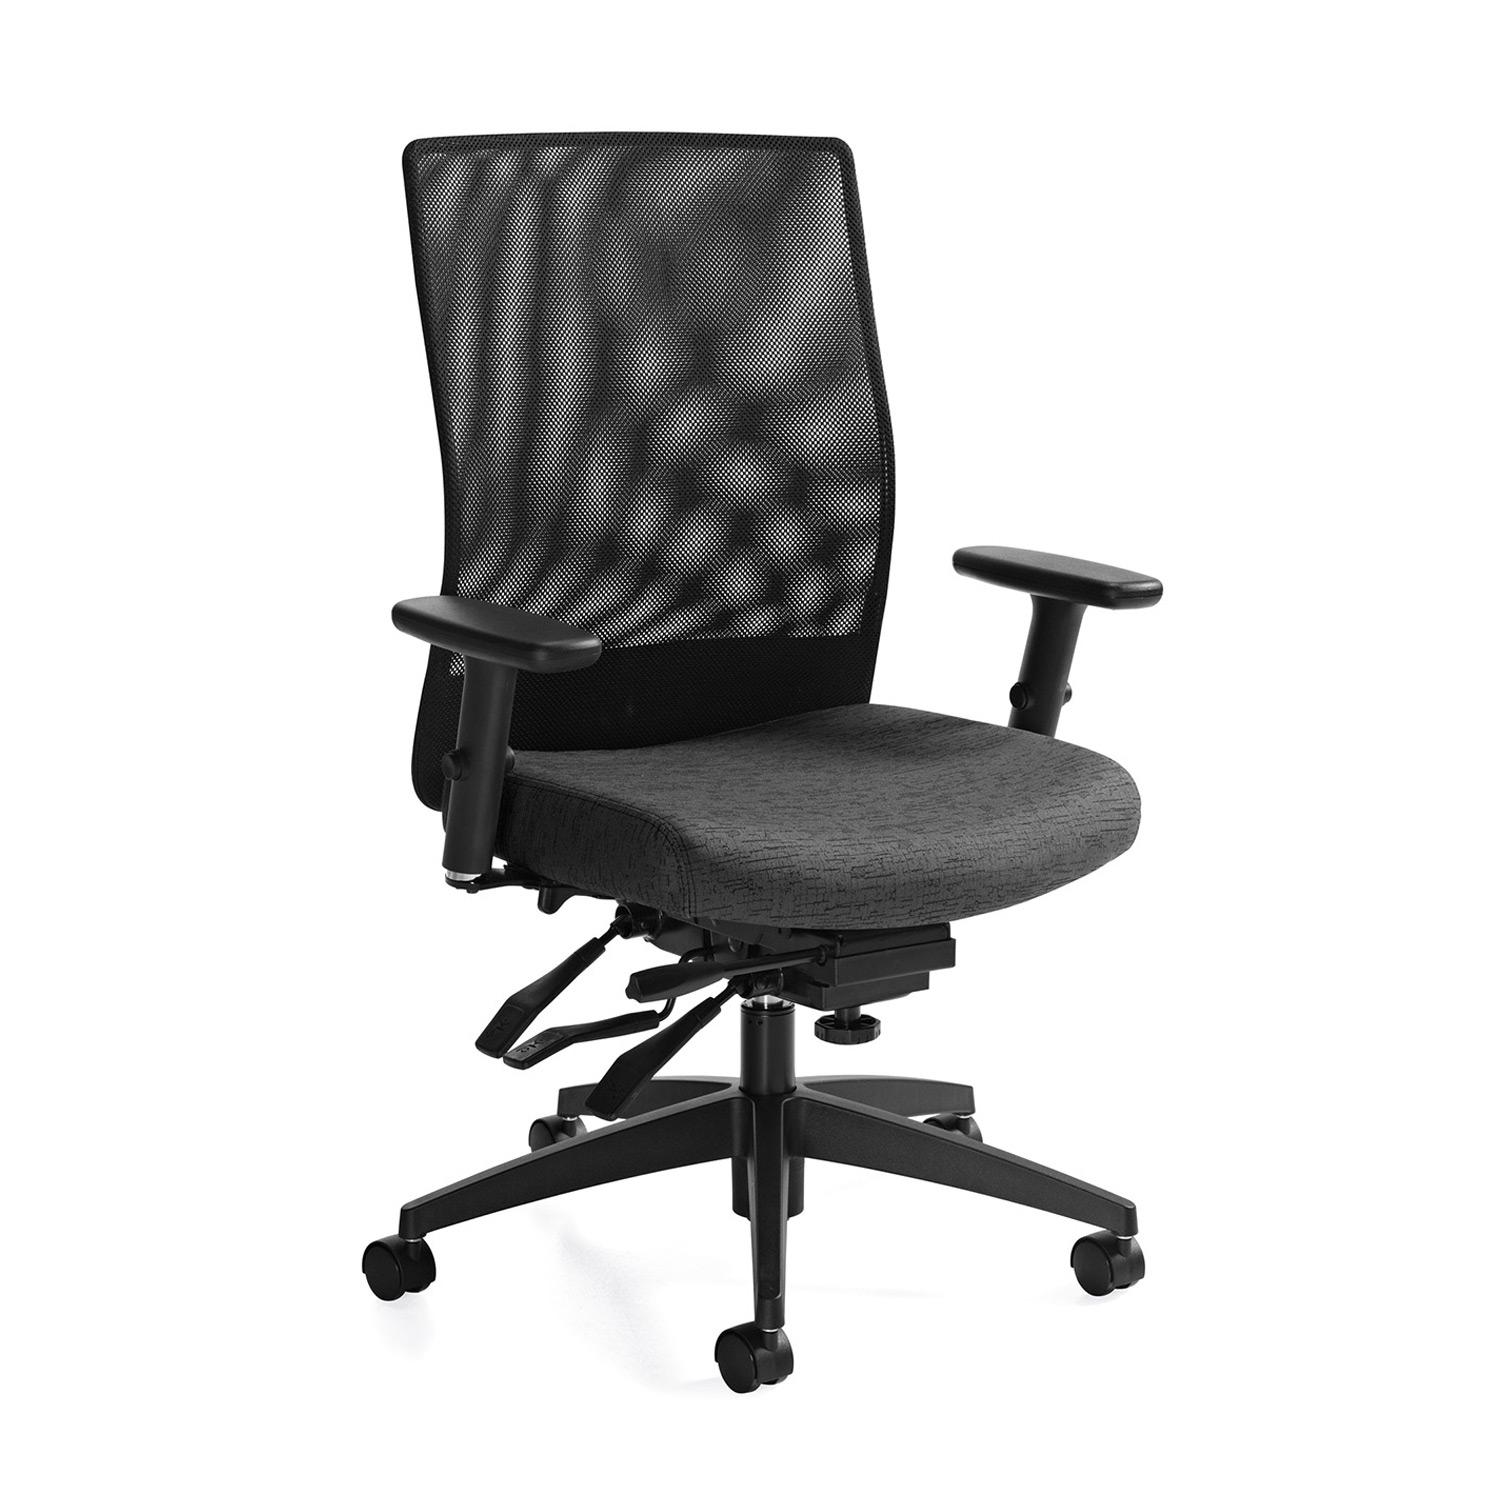 Office Furniture Chairs by cubicles.com